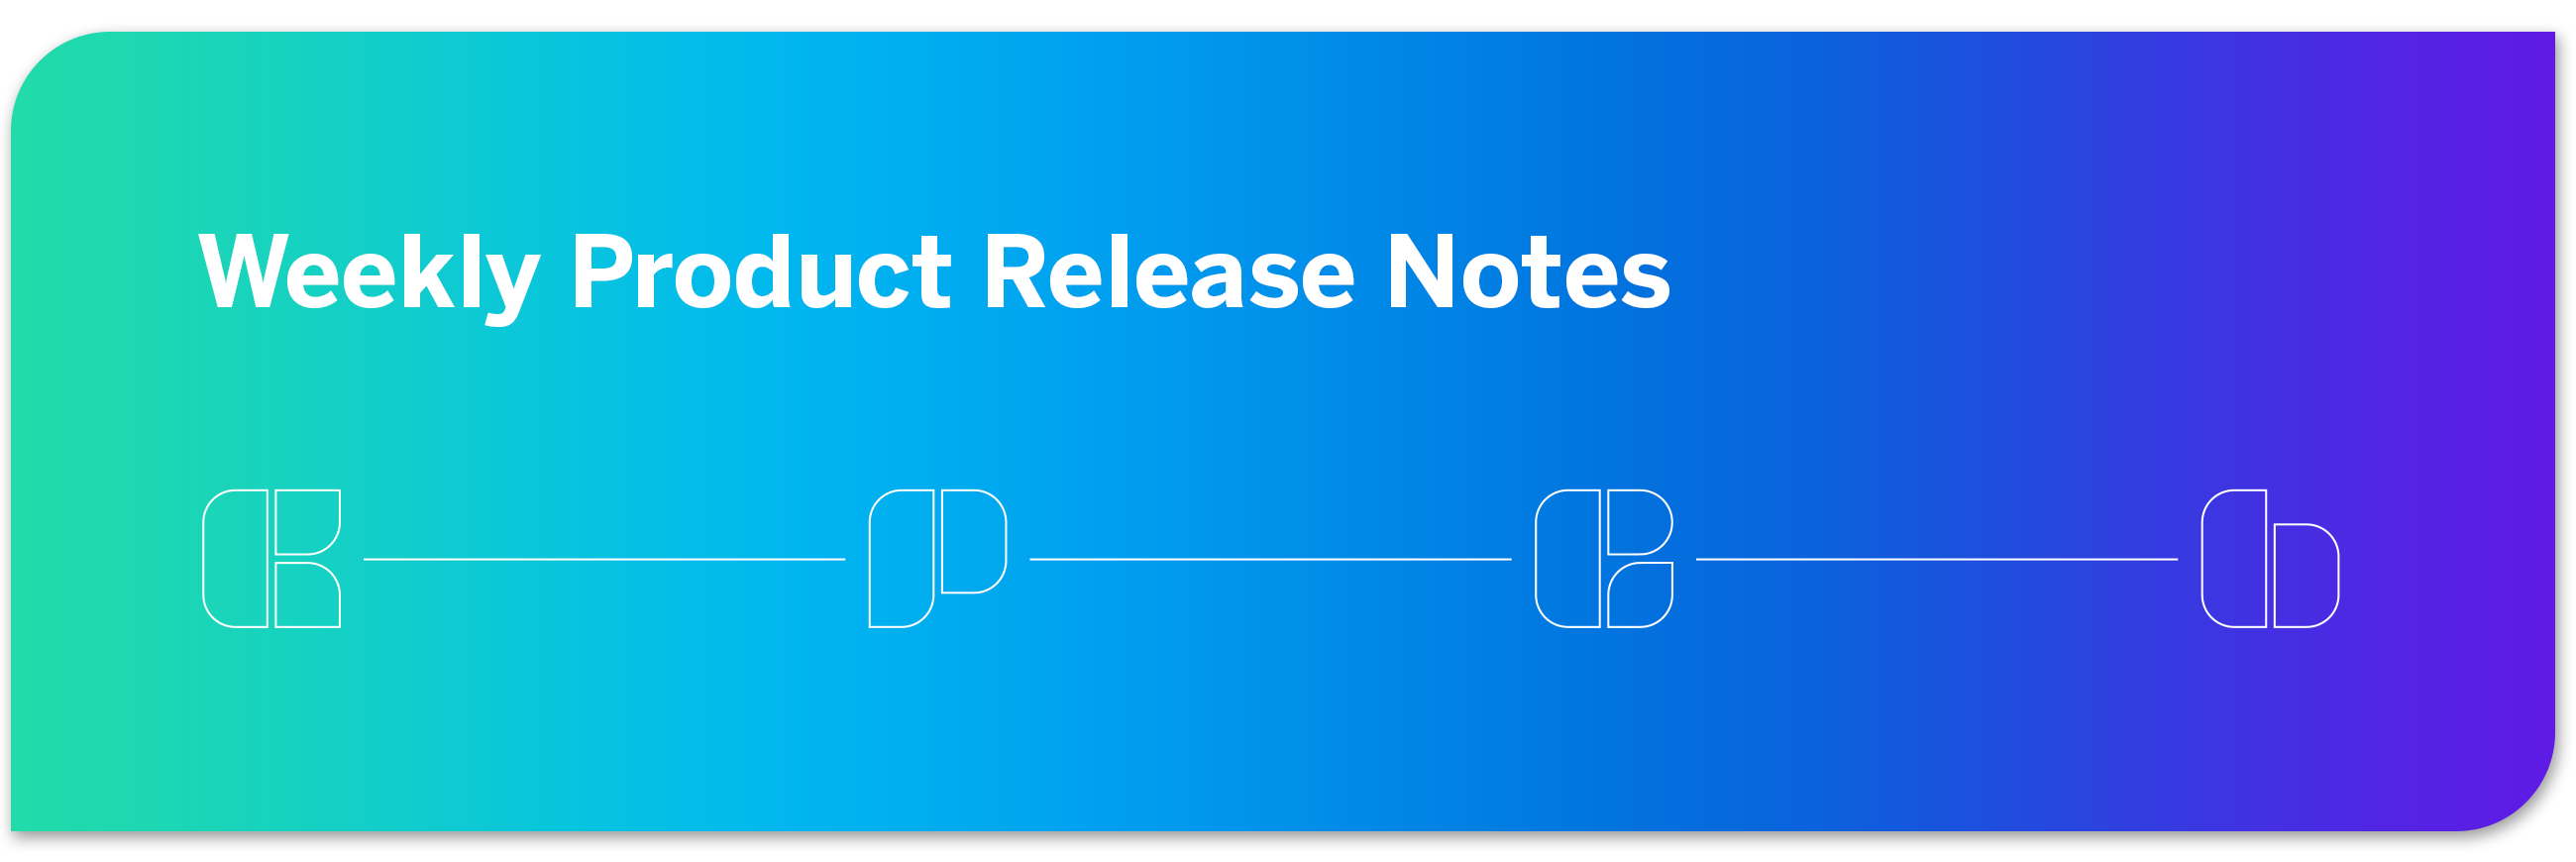 Weekly Product Release Notes banner